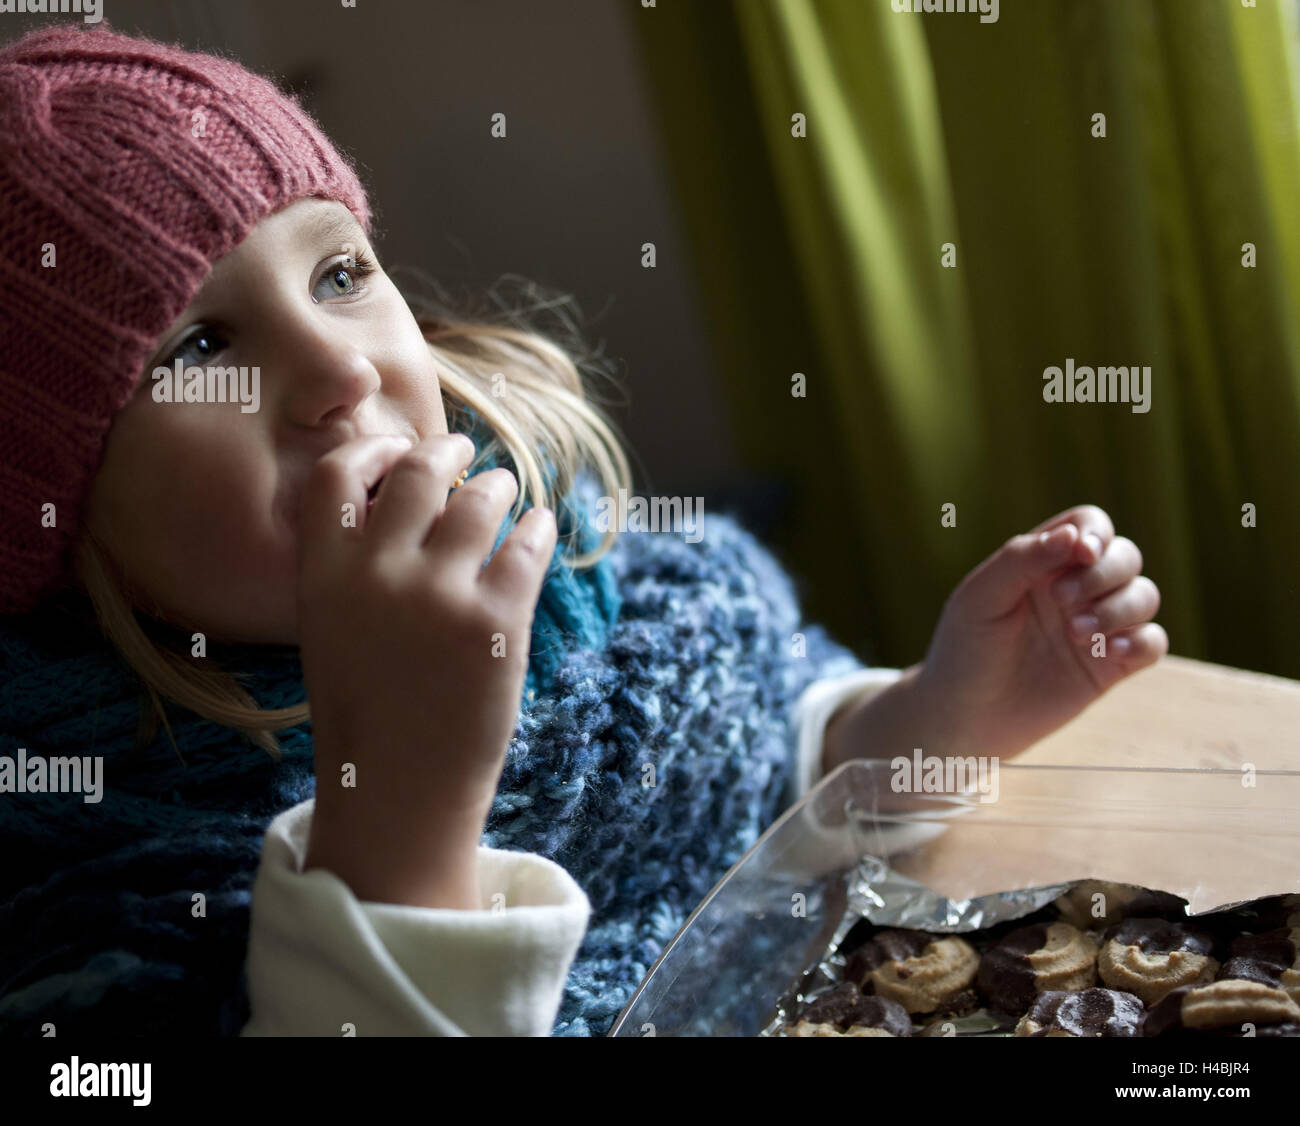 Girls, little places, eat, nibble, Stock Photo